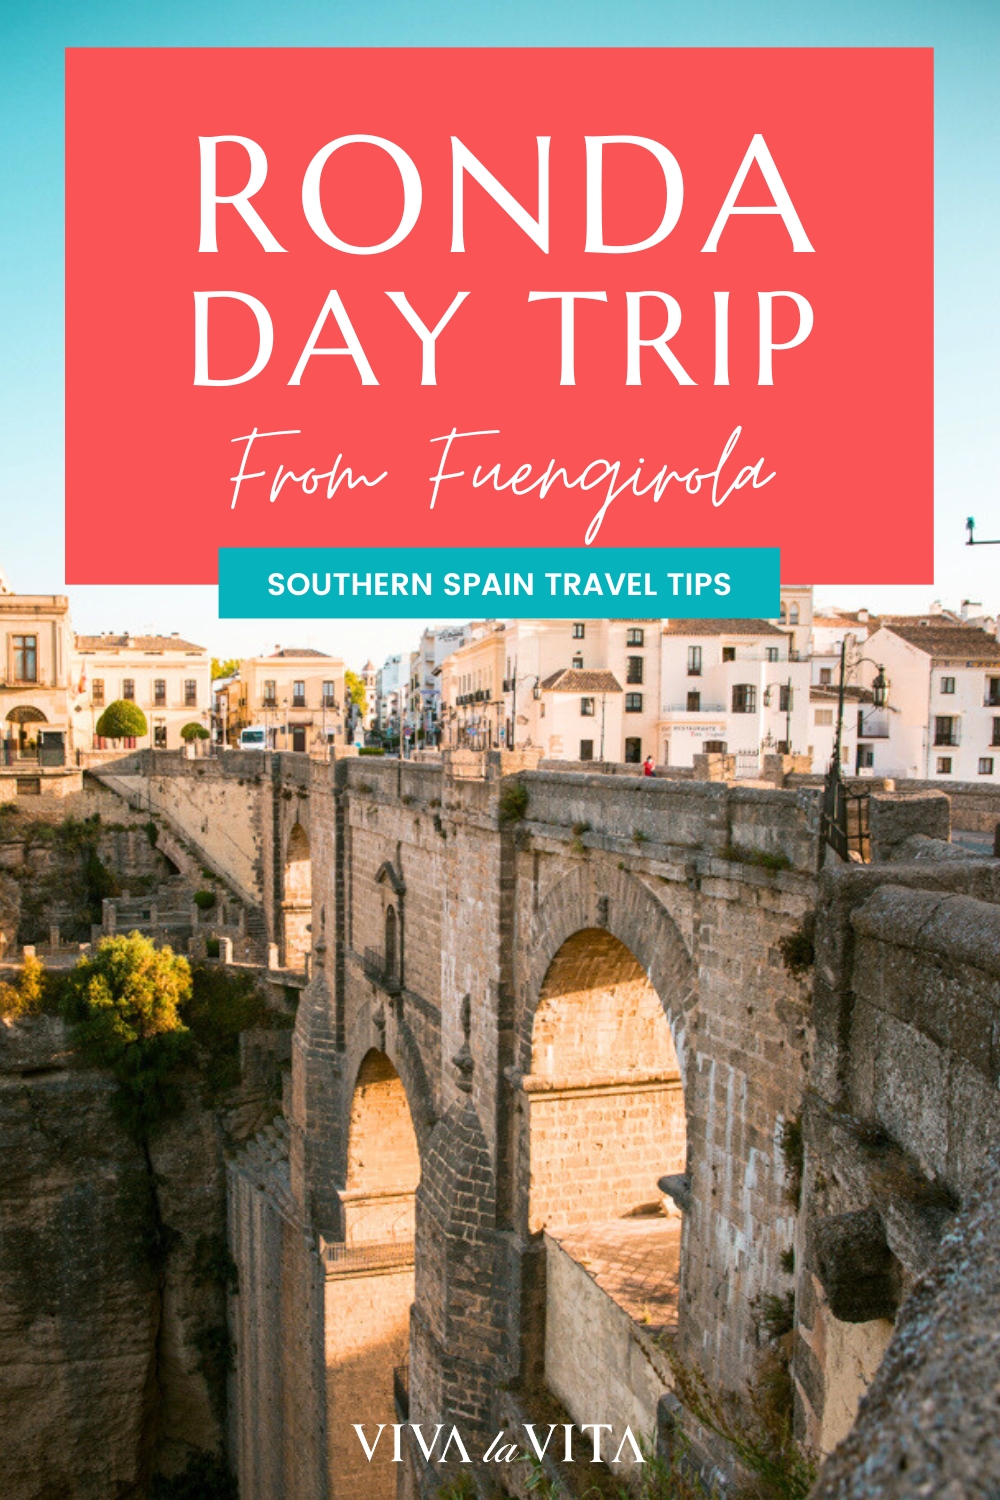 pinterest image showing the new bridge of Ronda in southern spain, with a headline - ronda day trip from Fuengirola, southern spain travel tips